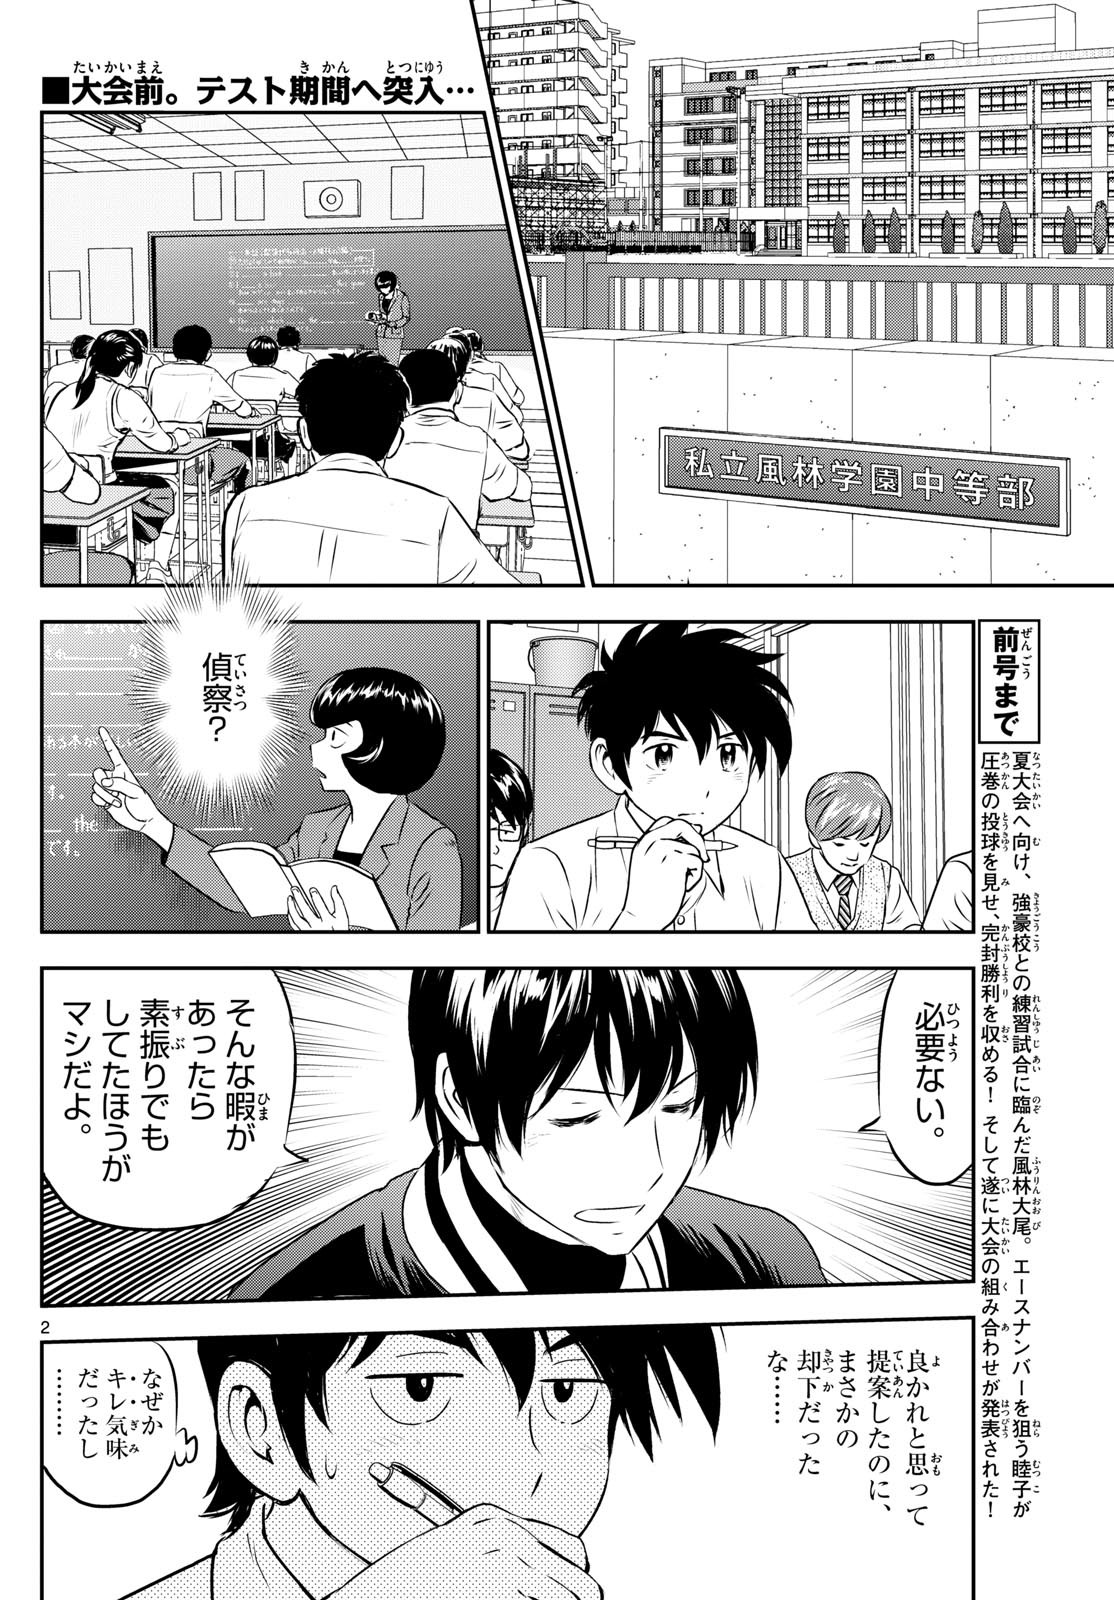 Major 2nd - メジャーセカンド - Chapter 259 - Page 2